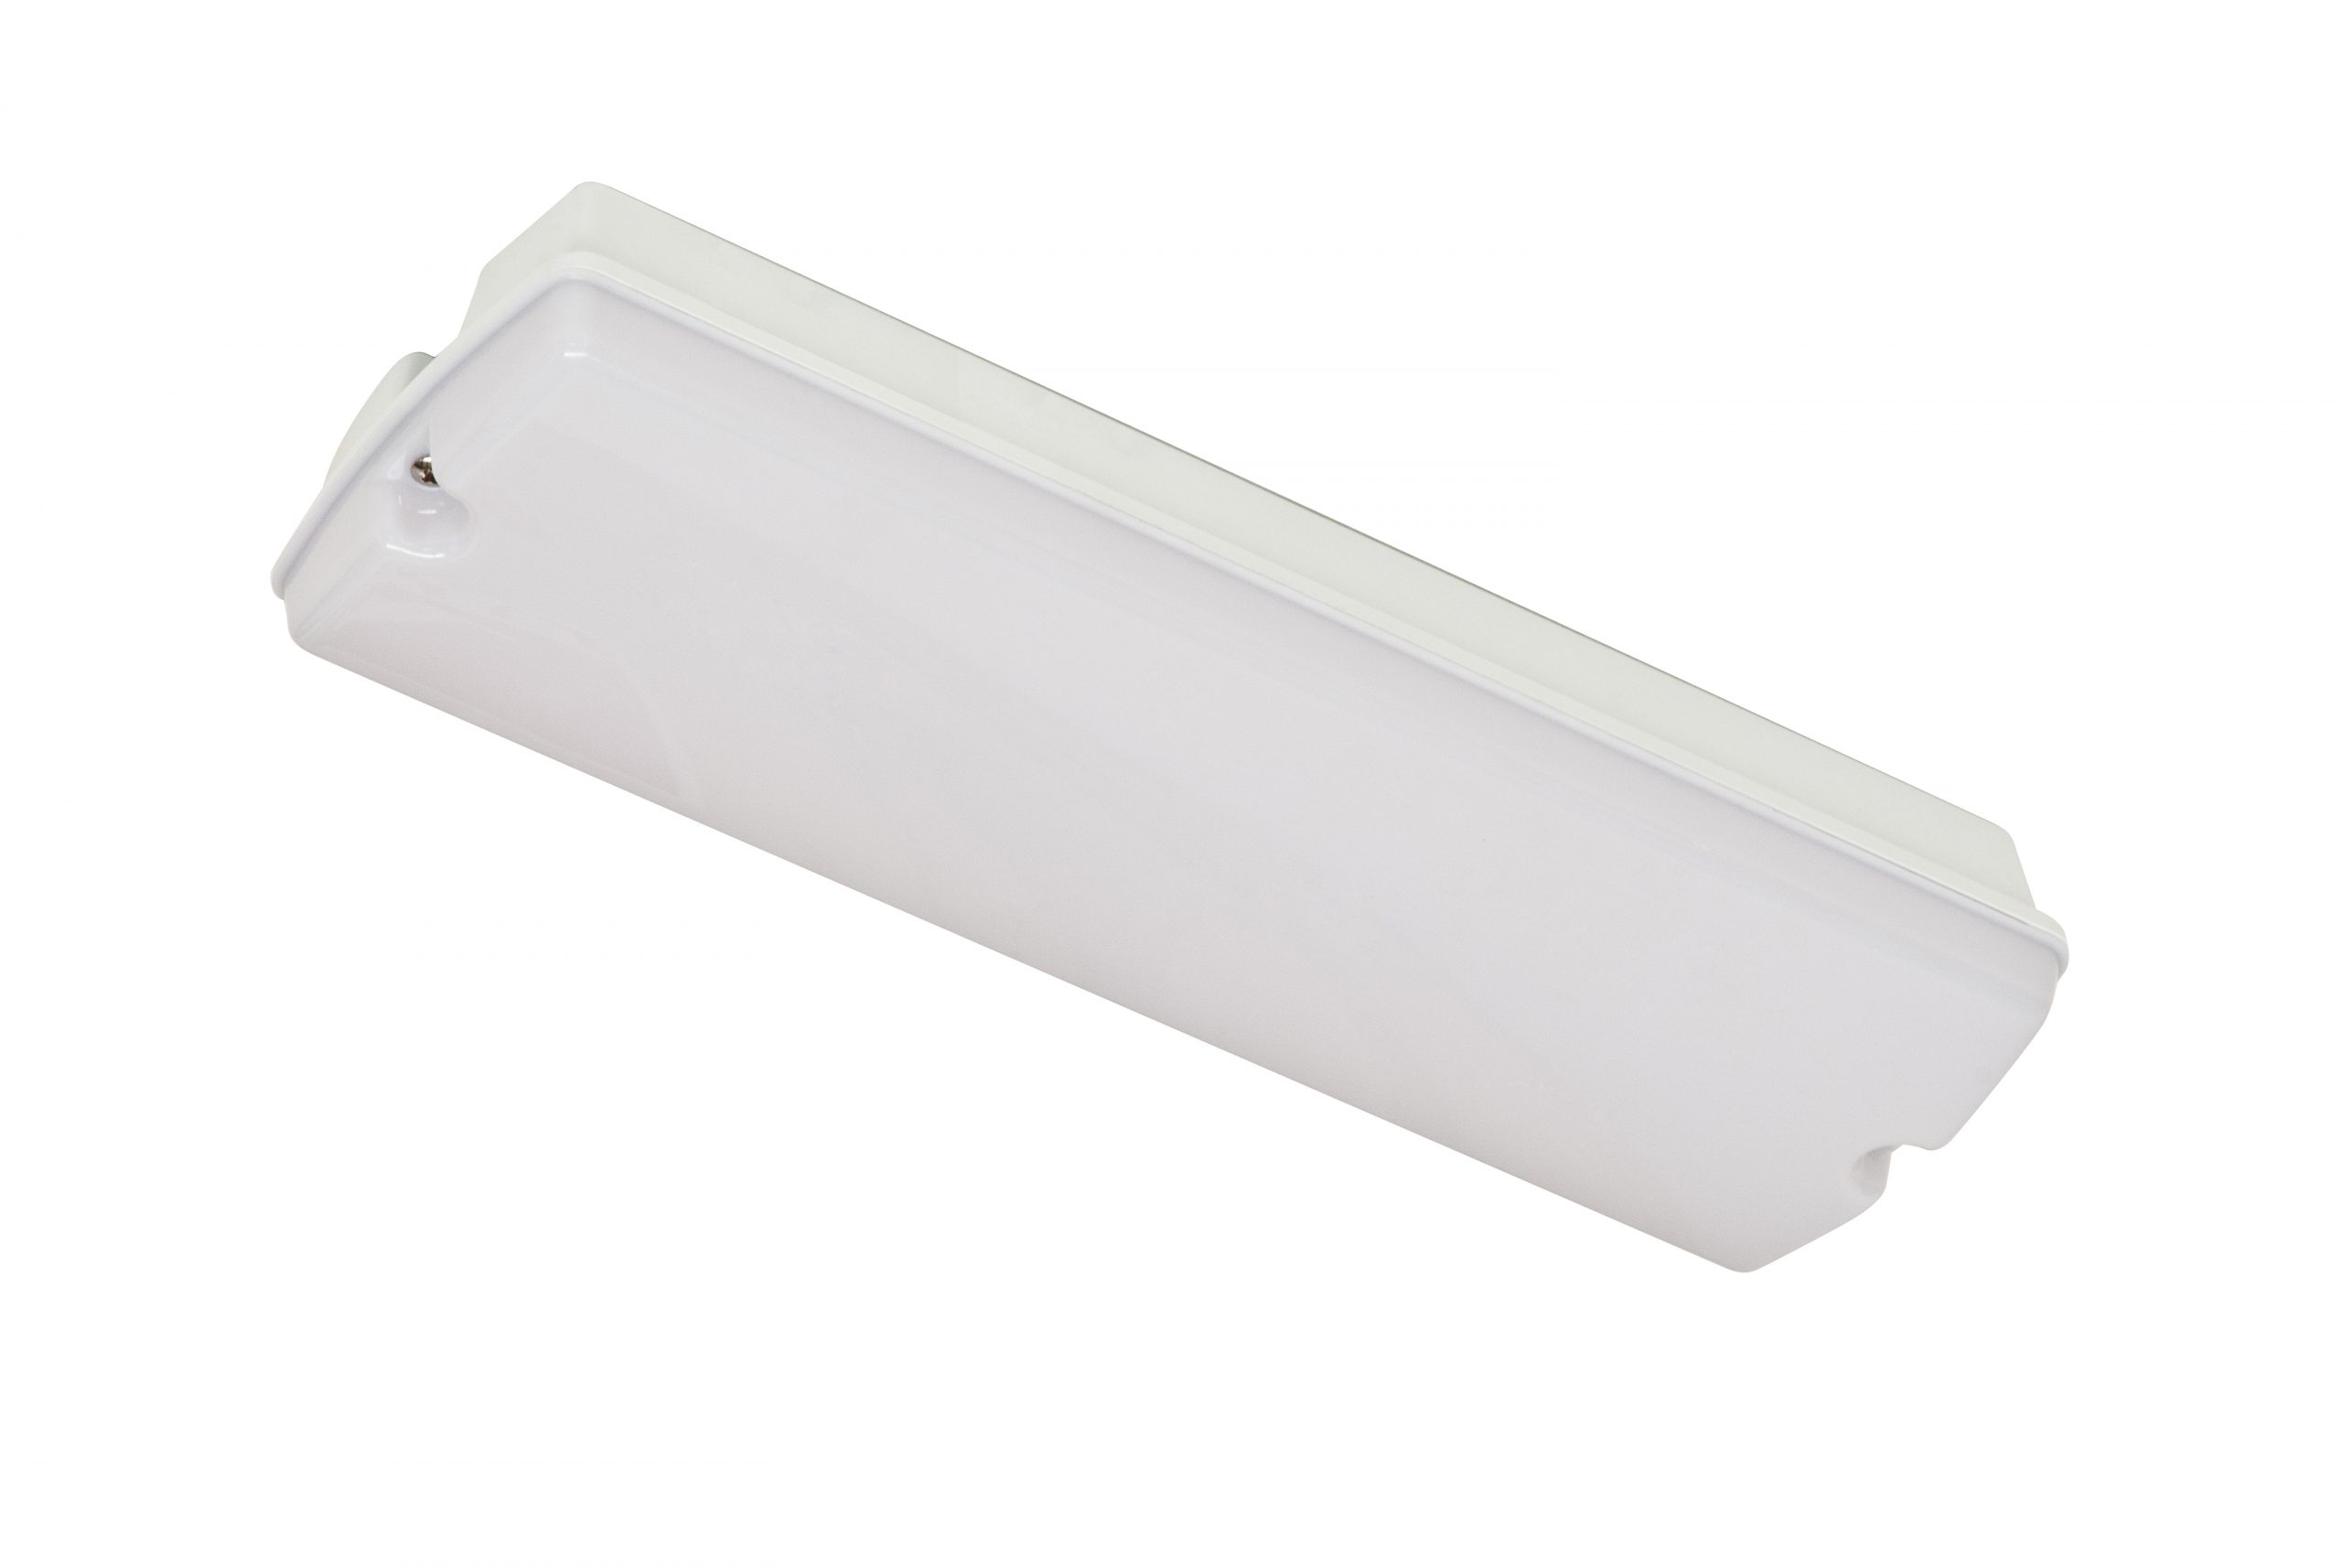 financiën oppervlakte Snooze Robus Portiekverlichting Led 6W Opaal Kap Ip65 350Lm R6Bhled 365x118x88Mm